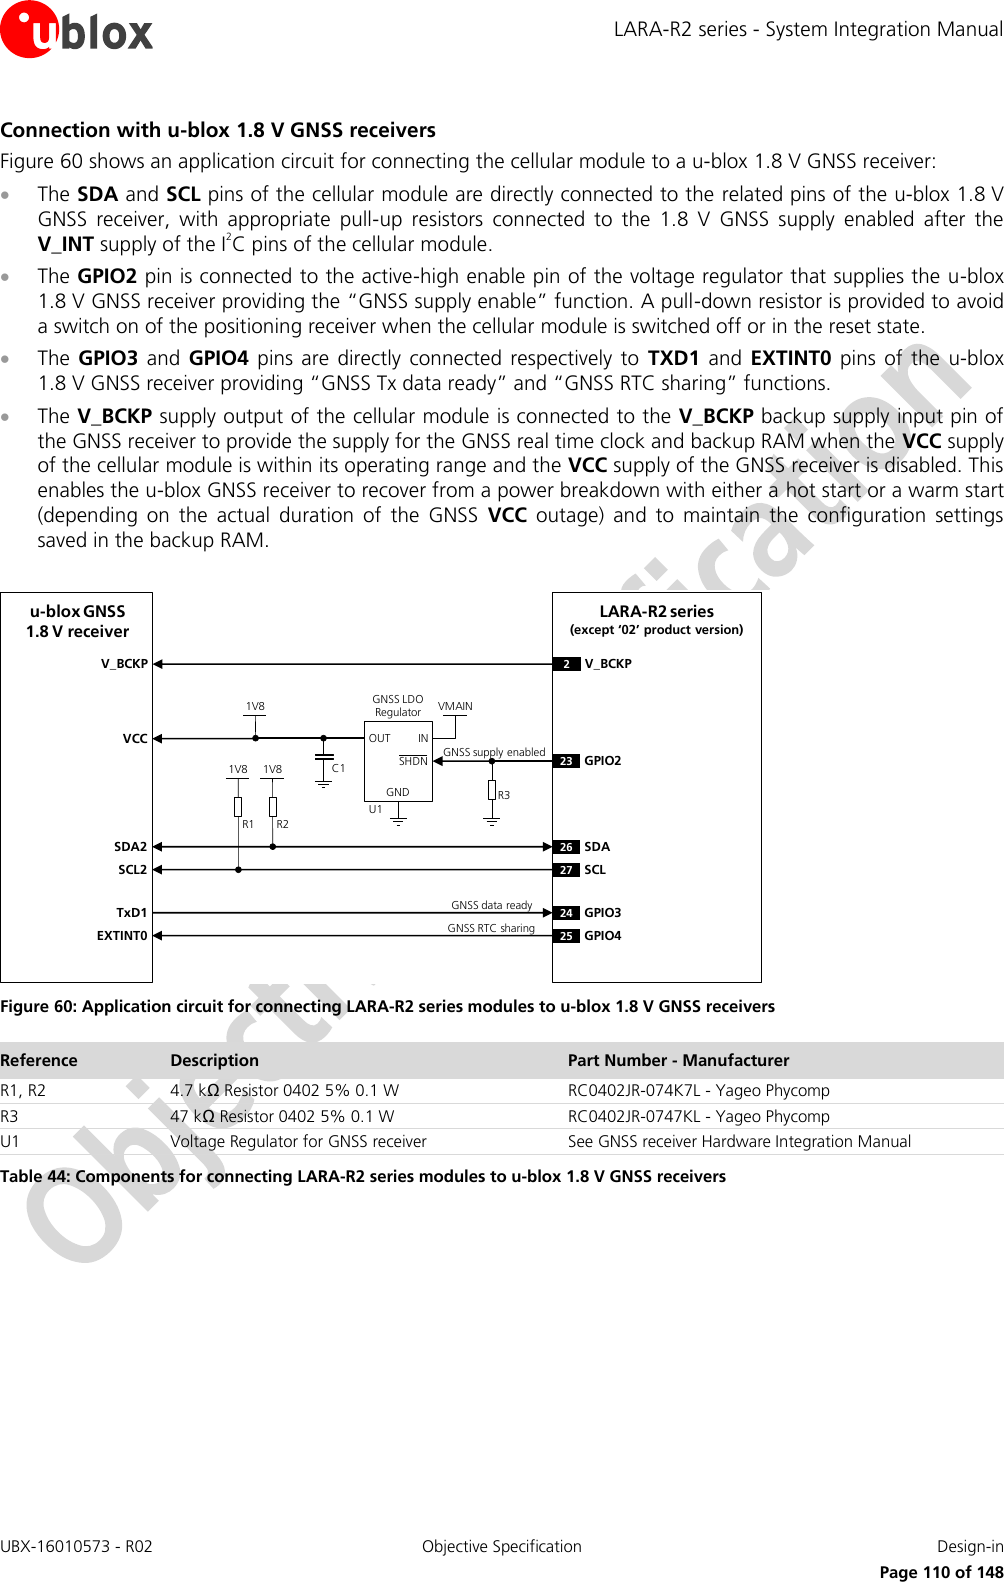 LARA-R2 series - System Integration Manual UBX-16010573 - R02  Objective Specification  Design-in     Page 110 of 148 Connection with u-blox 1.8 V GNSS receivers Figure 60 shows an application circuit for connecting the cellular module to a u-blox 1.8 V GNSS receiver:  The SDA and SCL pins of the cellular module are directly connected to the related pins of the u-blox 1.8 V GNSS  receiver,  with  appropriate  pull-up  resistors  connected  to  the  1.8  V  GNSS  supply  enabled  after  the V_INT supply of the I2C pins of the cellular module.  The GPIO2 pin is connected to the active-high enable pin of the voltage regulator that supplies the u-blox 1.8 V GNSS receiver providing the “GNSS supply enable” function. A pull-down resistor is provided to avoid a switch on of the positioning receiver when the cellular module is switched off or in the reset state.  The  GPIO3  and  GPIO4  pins  are  directly  connected respectively  to  TXD1  and  EXTINT0  pins  of  the  u-blox 1.8 V GNSS receiver providing “GNSS Tx data ready” and “GNSS RTC sharing” functions.  The V_BCKP supply output of the cellular module is connected to the V_BCKP backup supply input pin of the GNSS receiver to provide the supply for the GNSS real time clock and backup RAM when the VCC supply of the cellular module is within its operating range and the VCC supply of the GNSS receiver is disabled. This enables the u-blox GNSS receiver to recover from a power breakdown with either a hot start or a warm start (depending  on  the  actual  duration  of  the  GNSS  VCC  outage)  and  to  maintain  the  configuration  settings saved in the backup RAM.  R1INOUTGNDGNSS LDORegulatorSHDNu-blox GNSS1.8 V receiverSDA2SCL2R21V8 1V8VMAIN1V8U123 GPIO2SDASCLC1TxD1EXTINT0GPIO3GPIO426272425VCCR3V_BCKP V_BCKP2GNSS data readyGNSS RTC sharingGNSS supply enabledLARA-R2 series(except ‘02’ product version) Figure 60: Application circuit for connecting LARA-R2 series modules to u-blox 1.8 V GNSS receivers Reference Description Part Number - Manufacturer R1, R2 4.7 kΩ Resistor 0402 5% 0.1 W  RC0402JR-074K7L - Yageo Phycomp R3 47 kΩ Resistor 0402 5% 0.1 W  RC0402JR-0747KL - Yageo Phycomp U1 Voltage Regulator for GNSS receiver See GNSS receiver Hardware Integration Manual Table 44: Components for connecting LARA-R2 series modules to u-blox 1.8 V GNSS receivers  